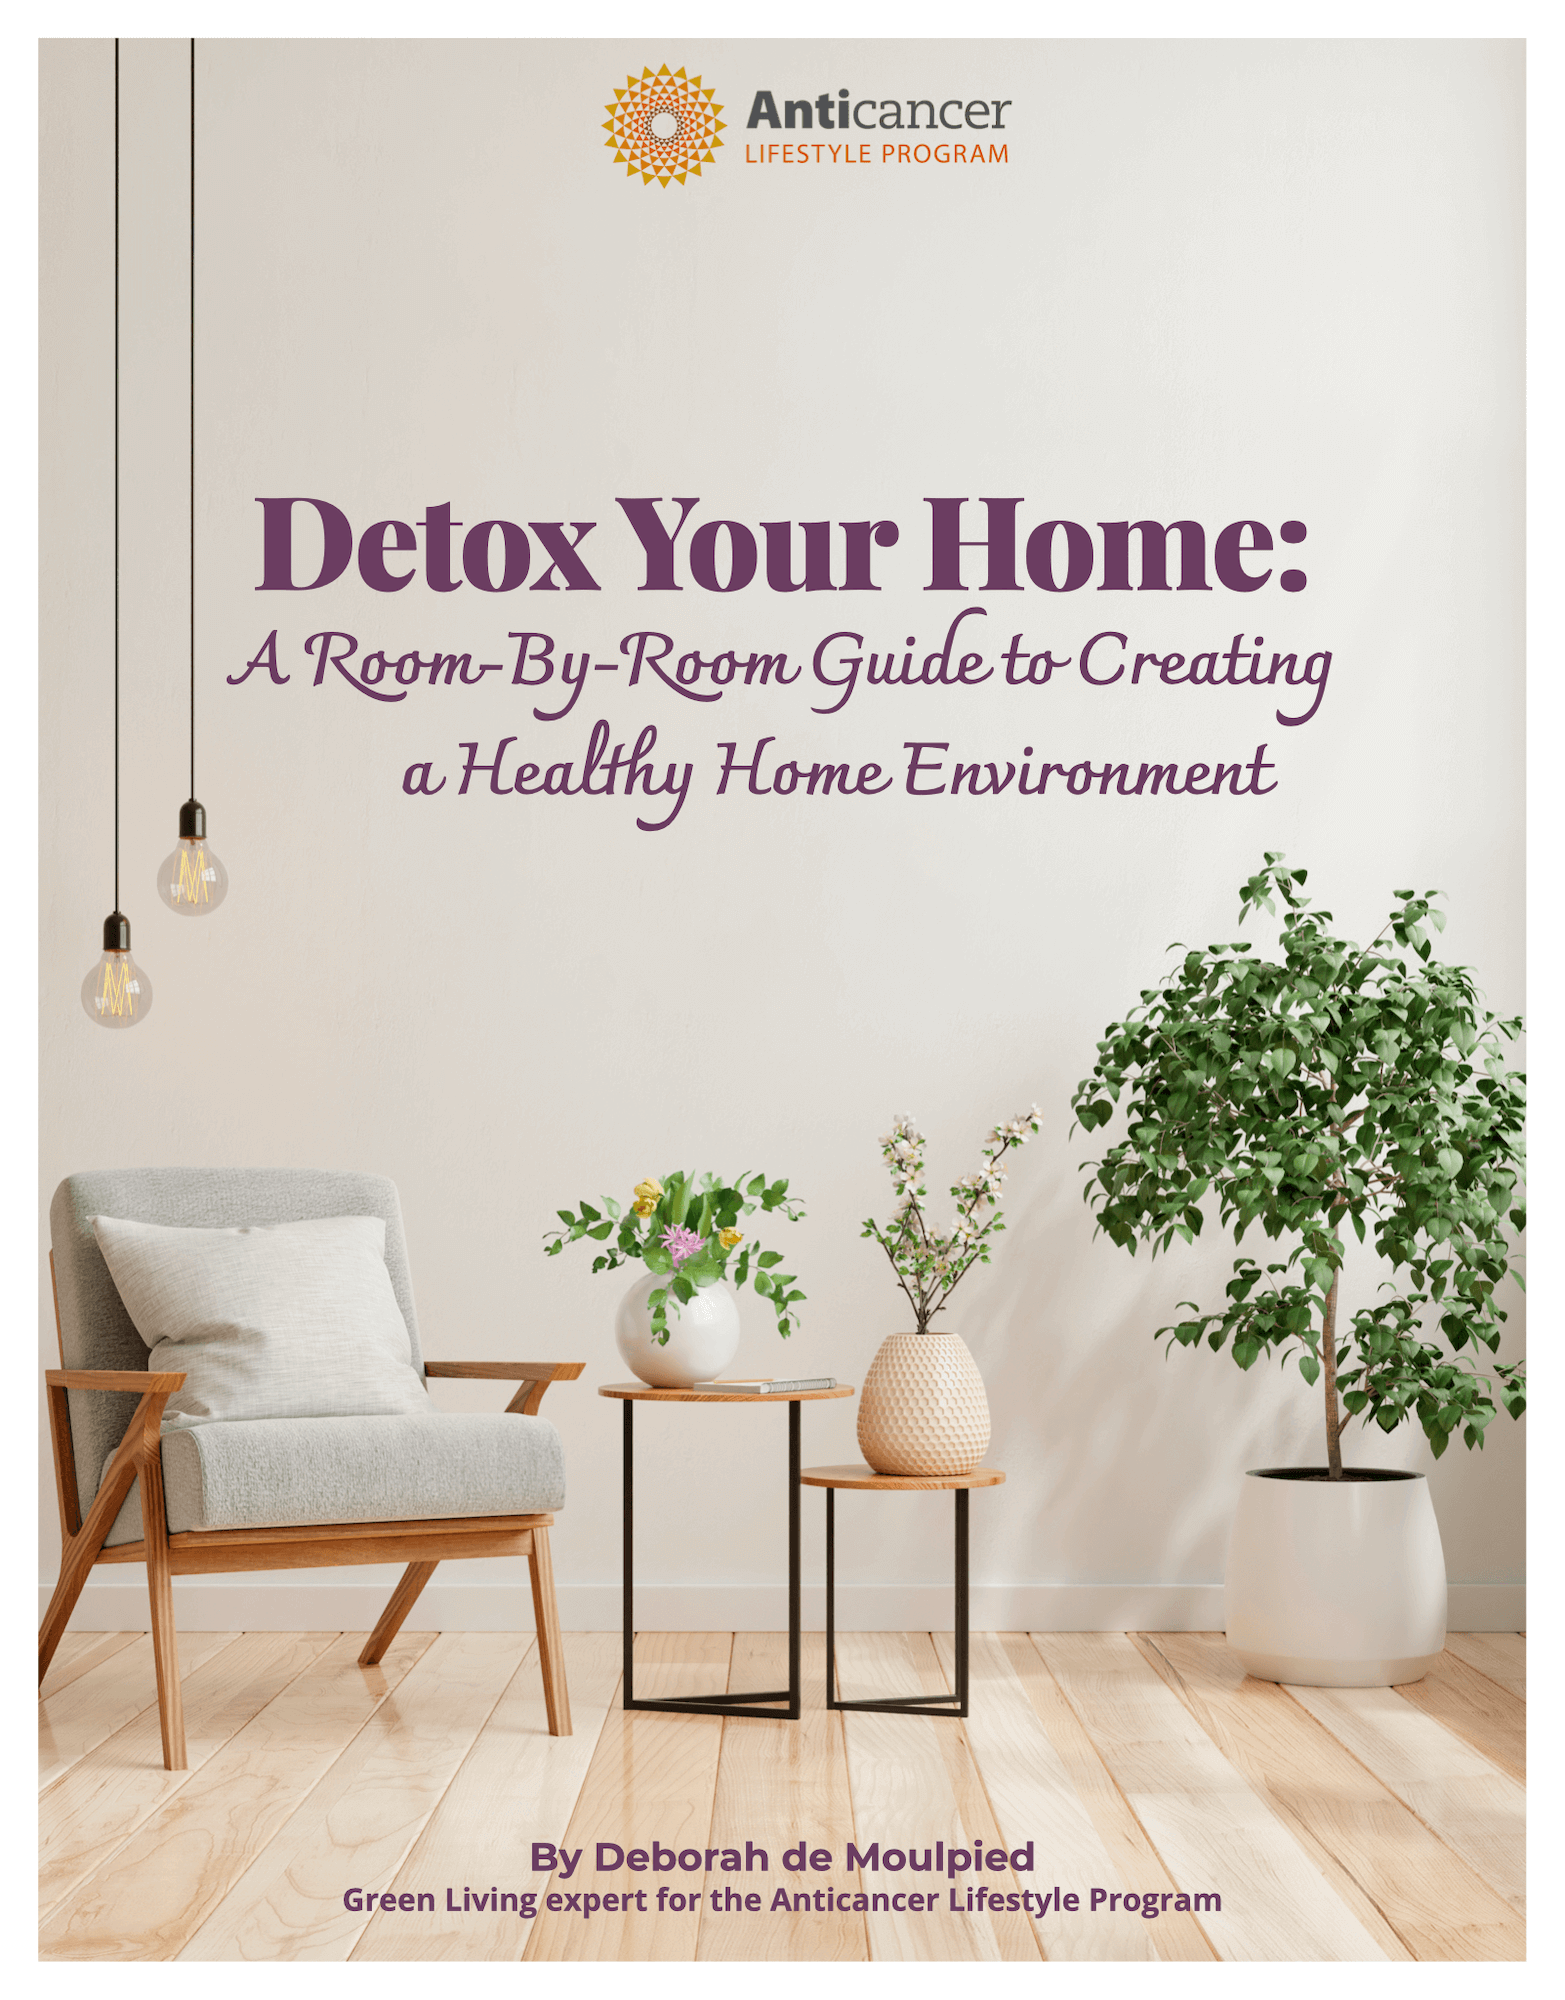 Detox Your Home: A Room-By-Room Guide to Creating a Healthy Home Environment